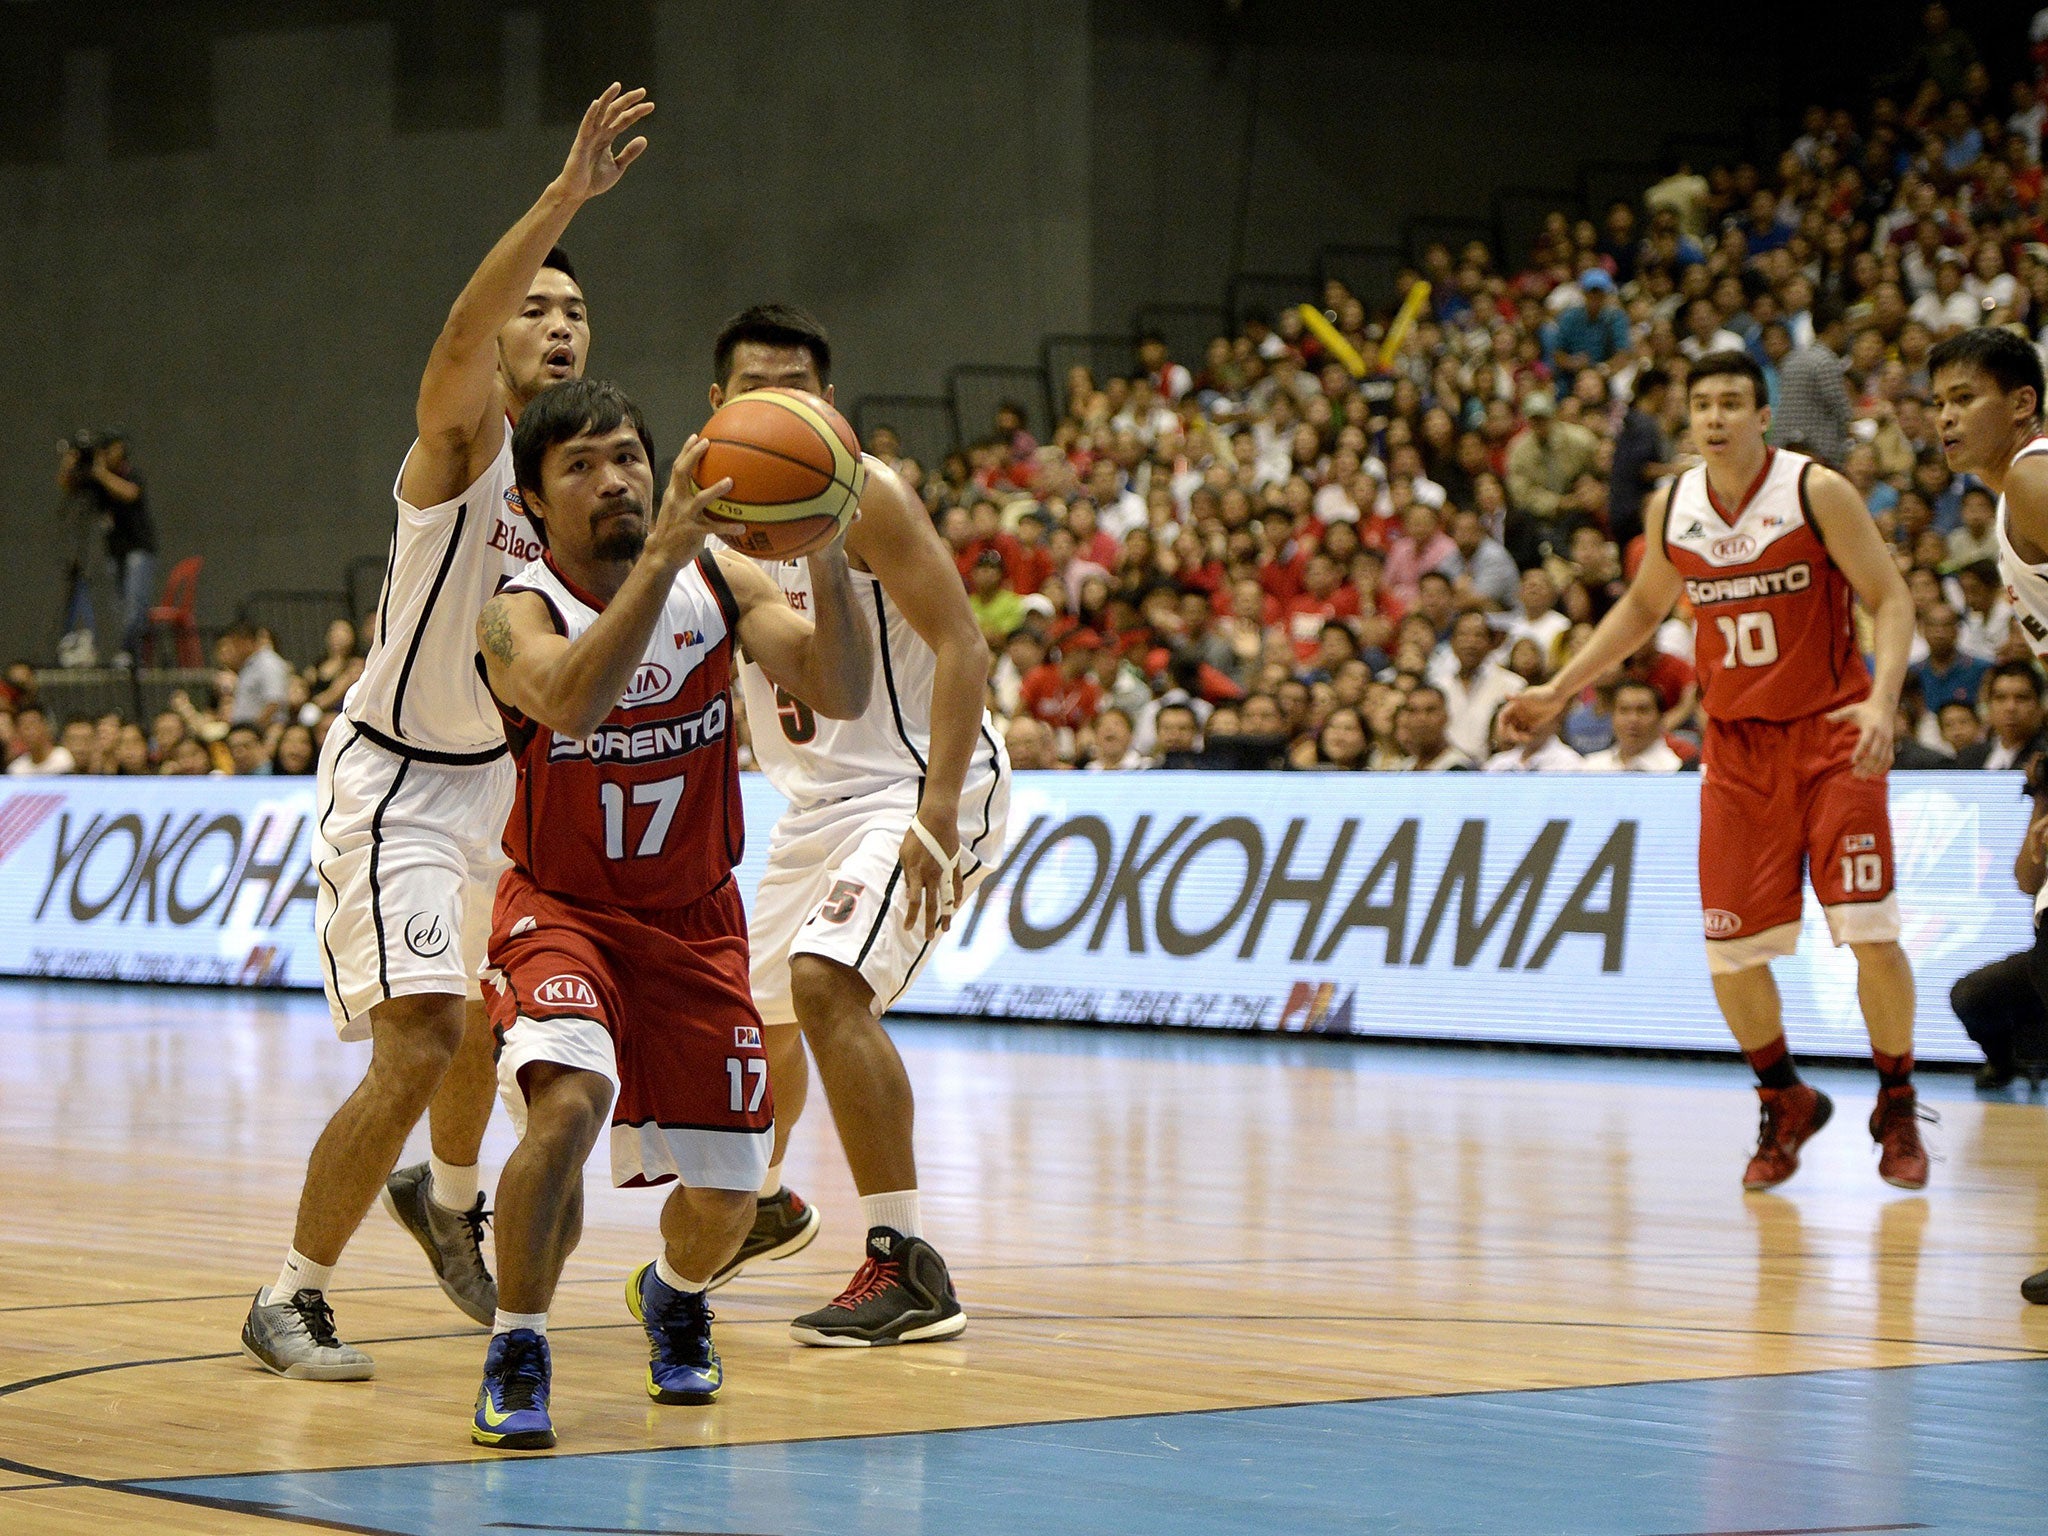 Manny Pacquiao (left) makes a pass